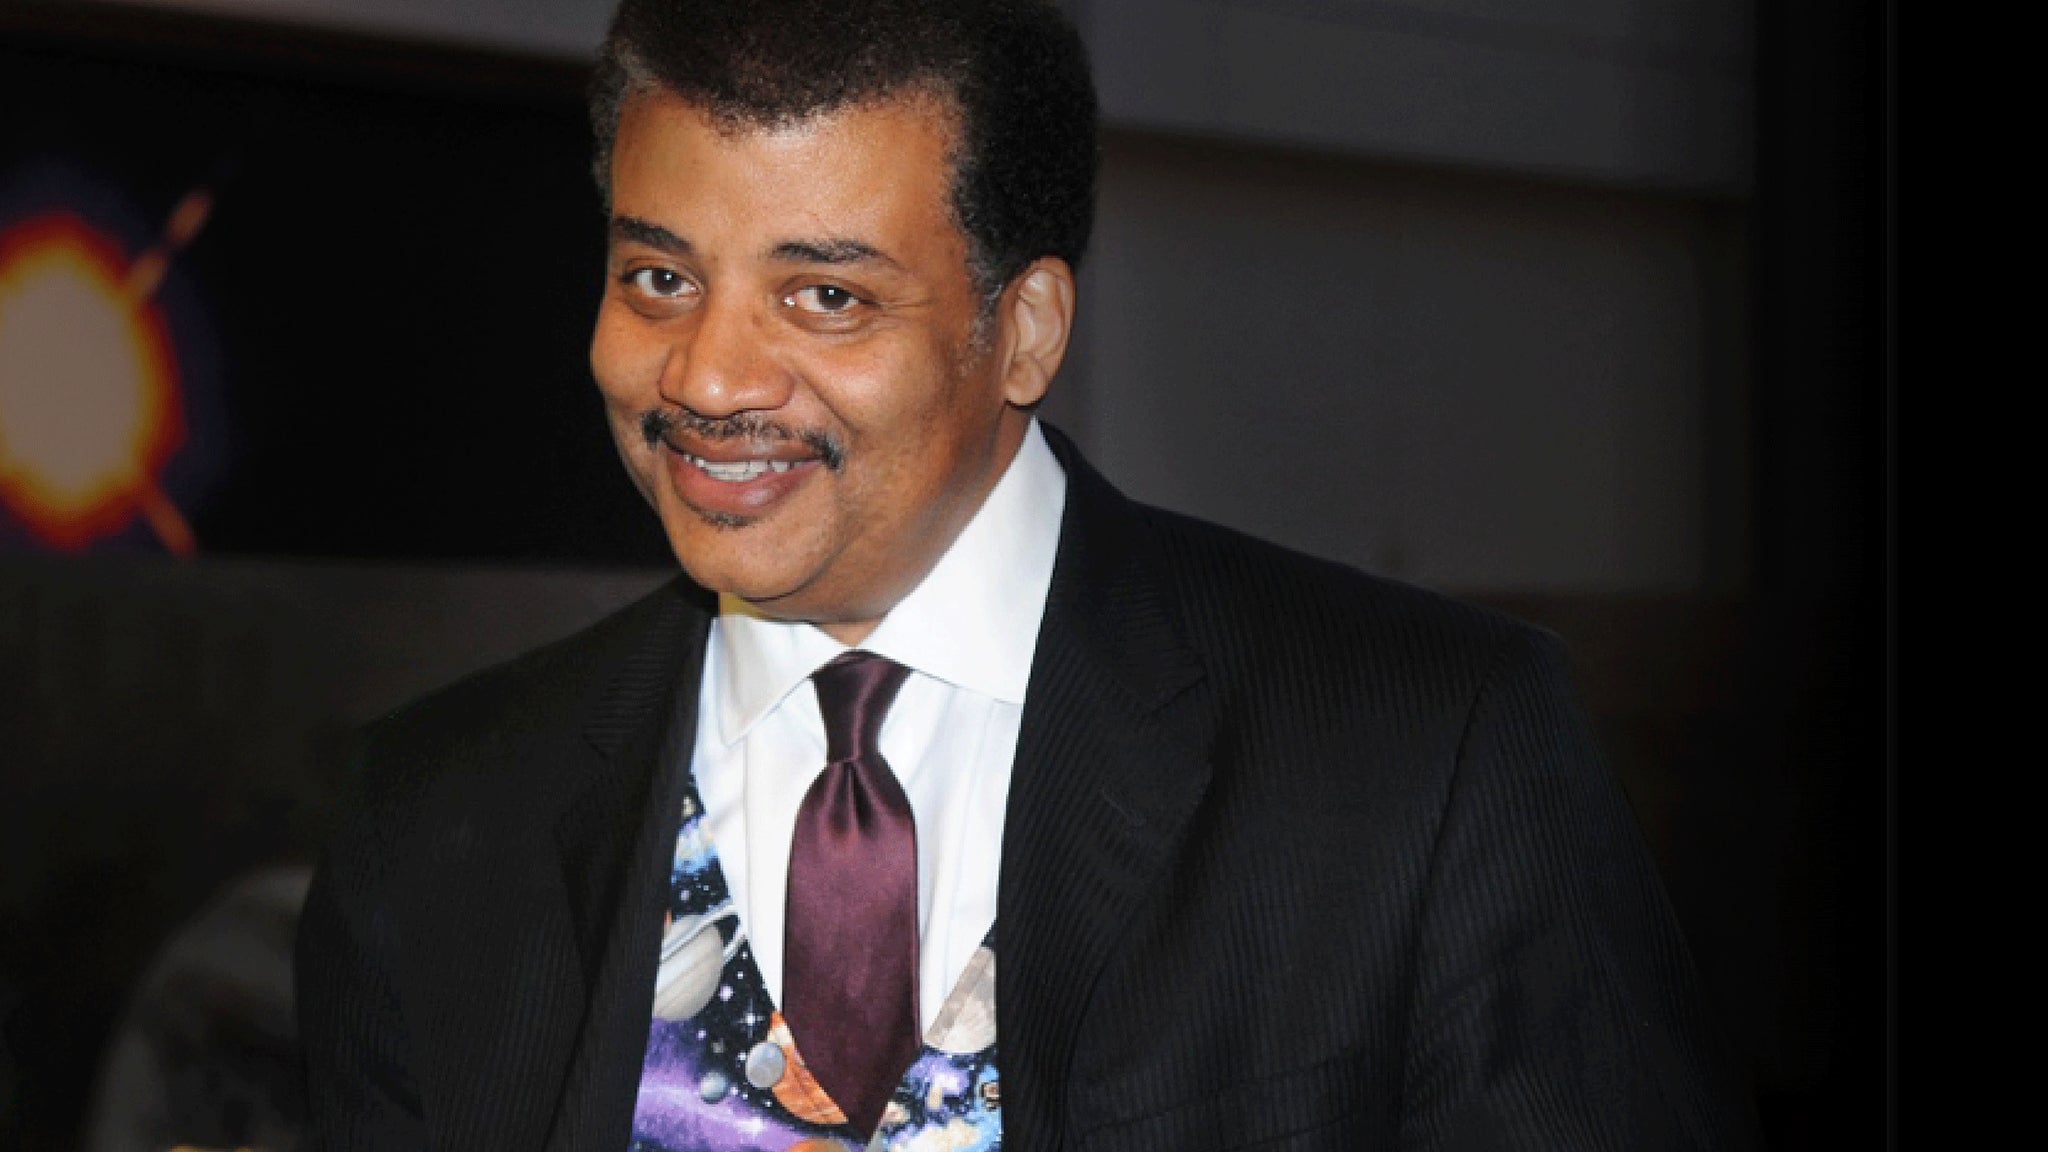 Dr. Neil DeGrasse Tyson: An Astrophysicist Goes To The Movies